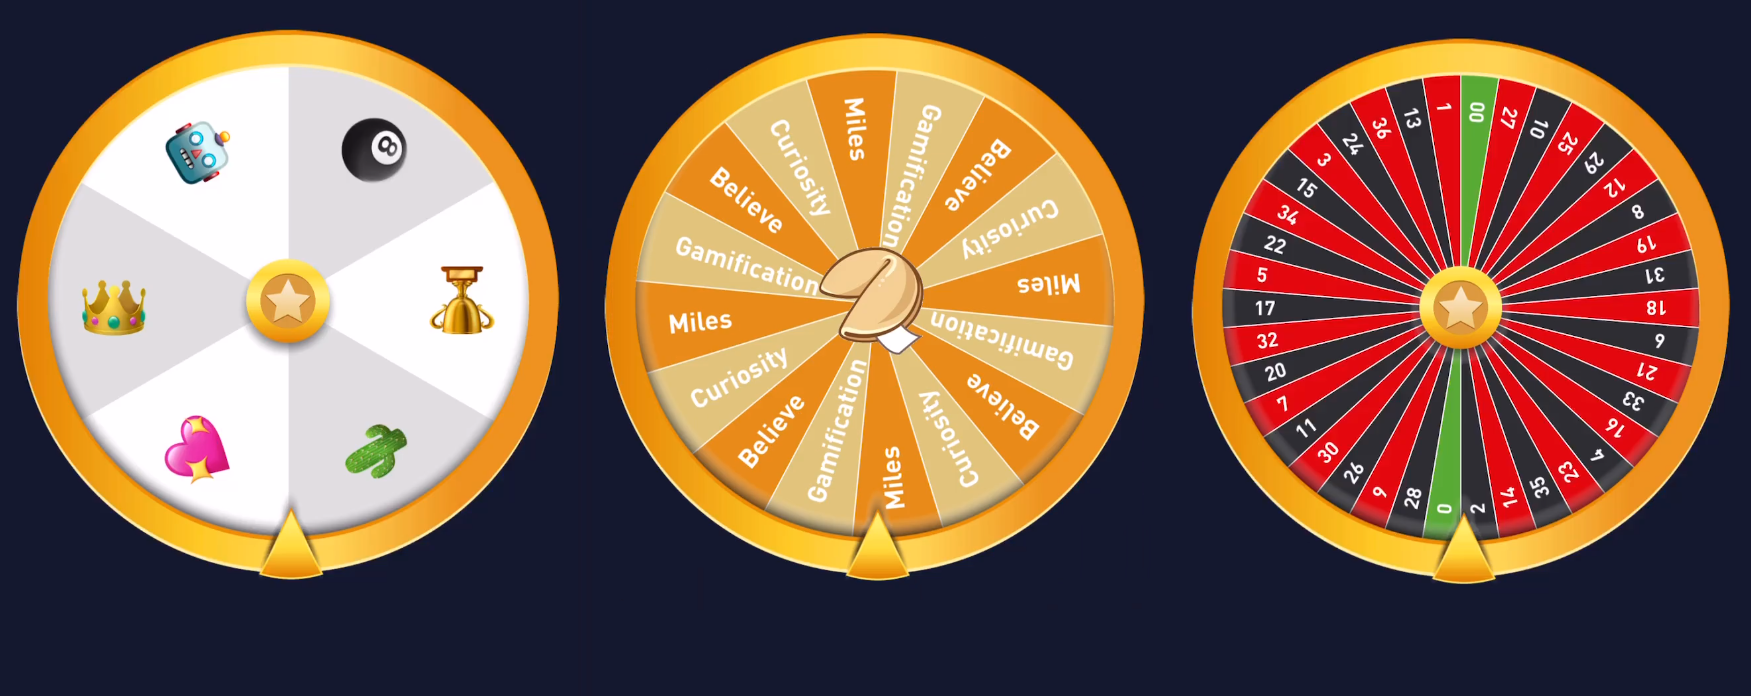 Spin Wheel Game in the Office | Buzzer – the Duelbox Blog